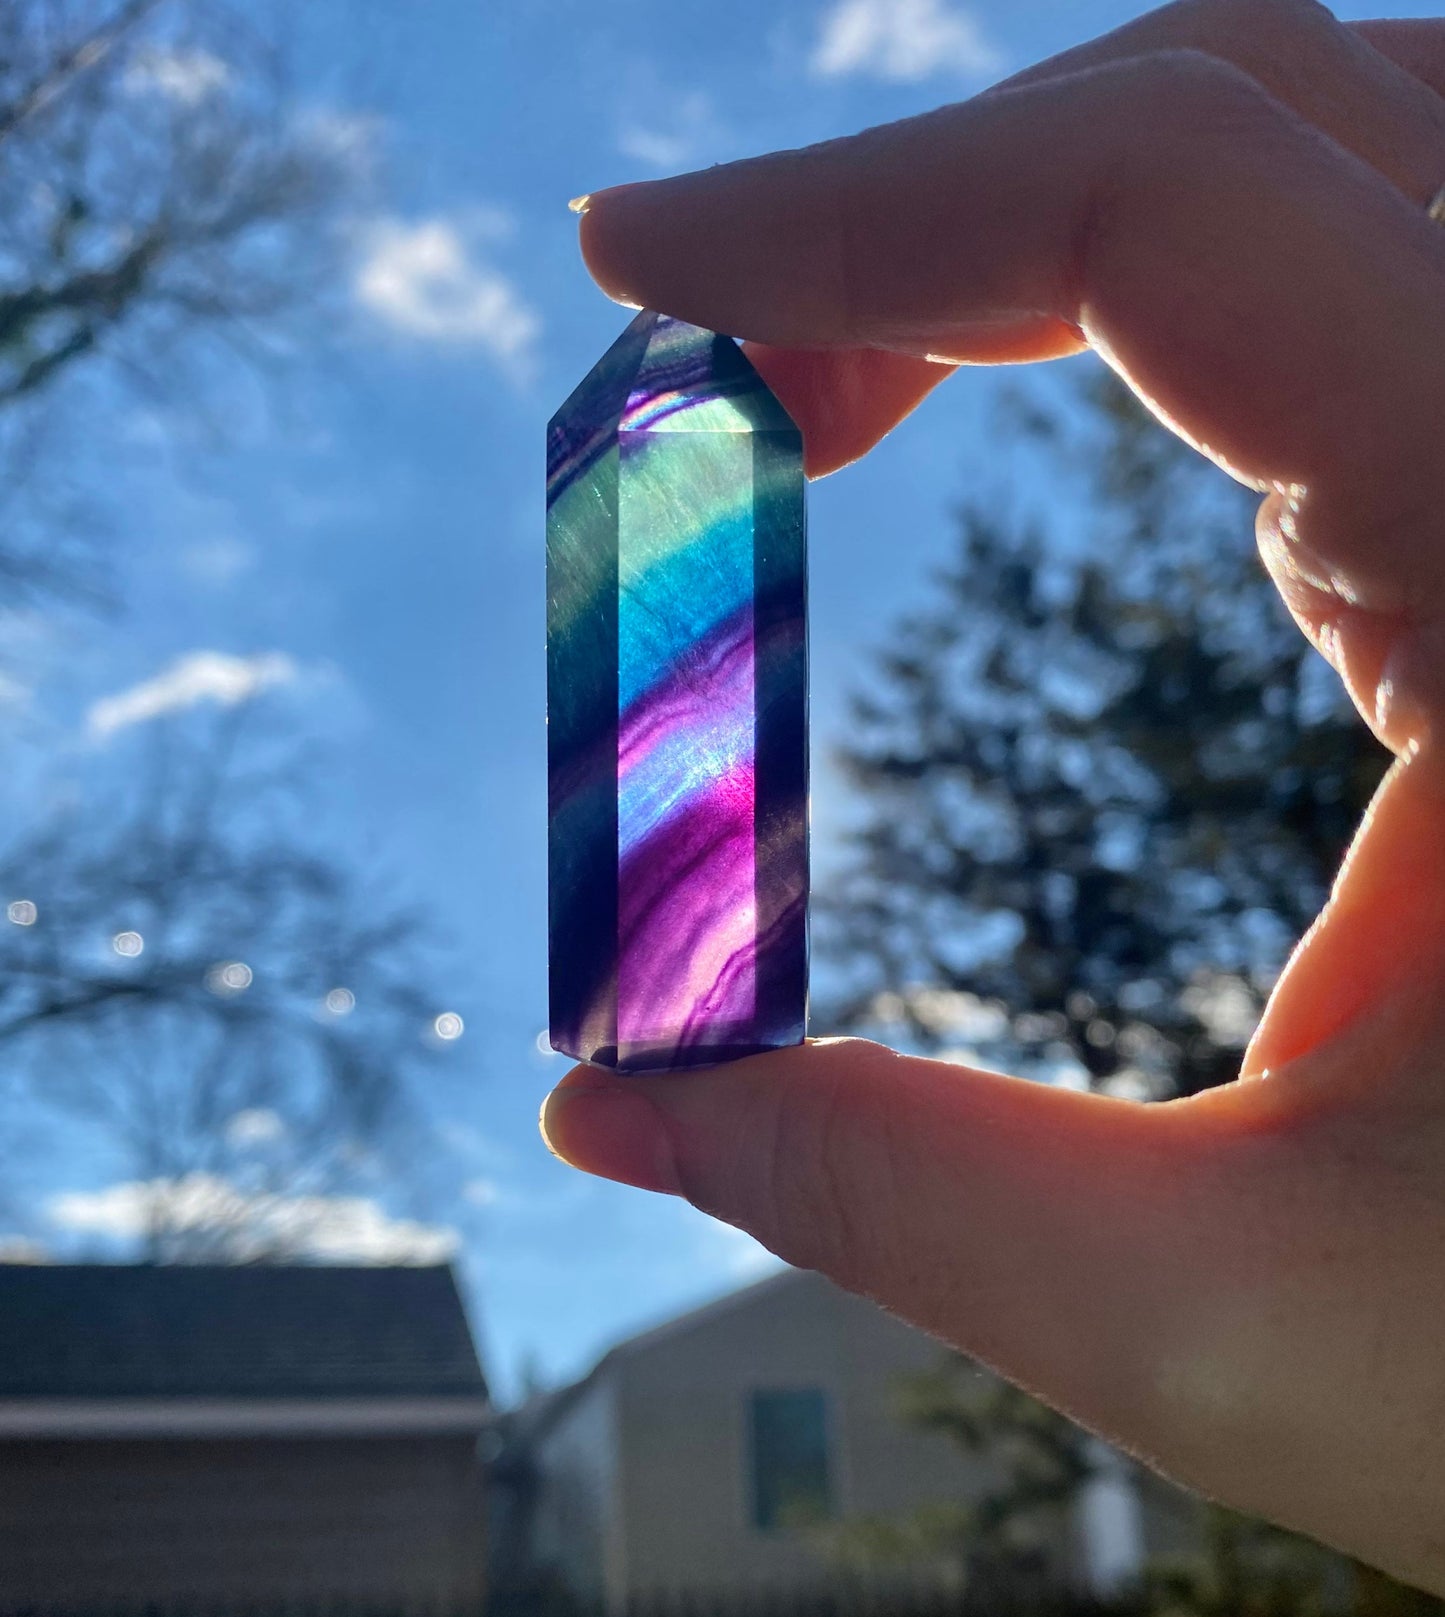 Super High Quality Rainbow Flourite Point Aprox 1-1.5 Inches 6 Faceted Reiki Healing Crystal All Natural Stone